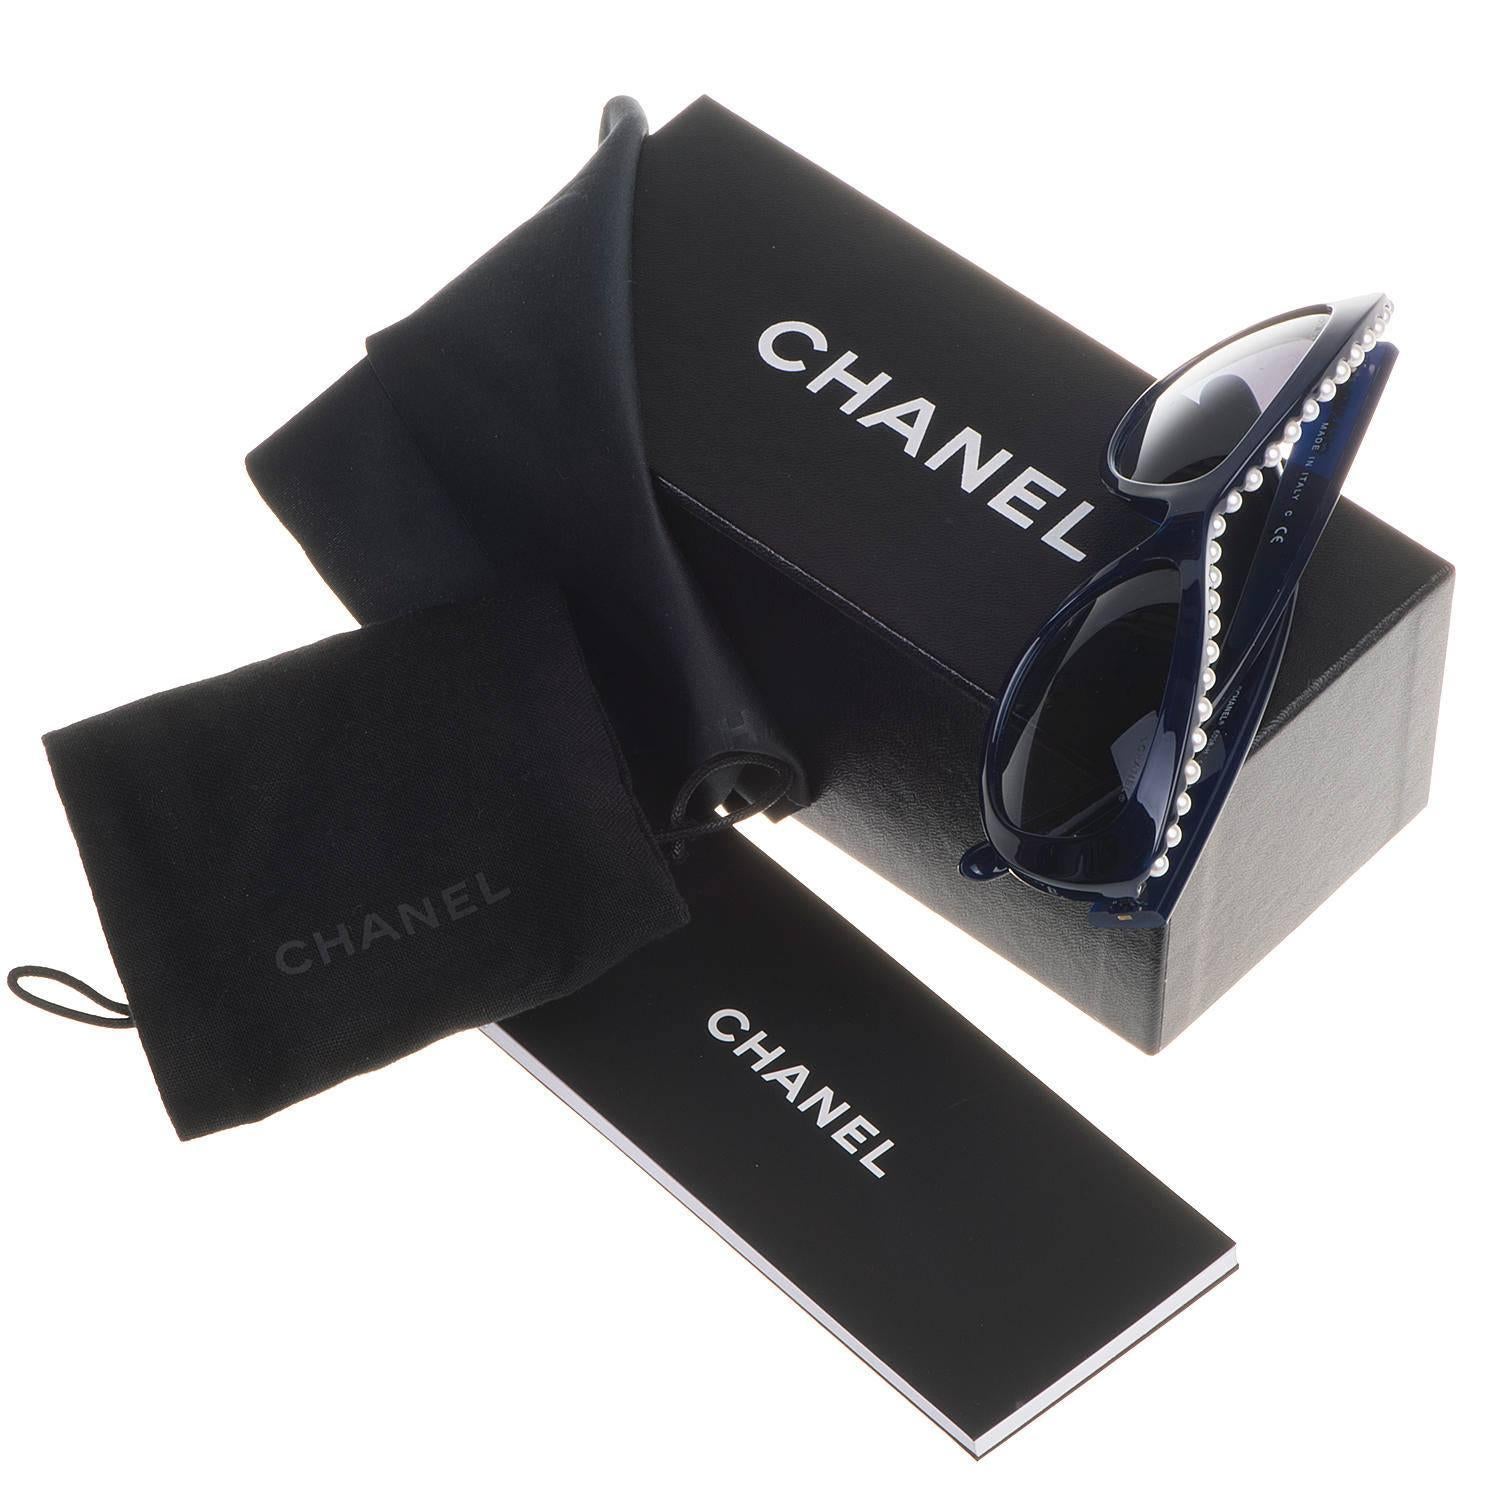 A Pristine pair of Chanel Sunglasses with Blue lens and faux pearl inlays to the top of the frame. Signed and still with their original box and lens cleaner.